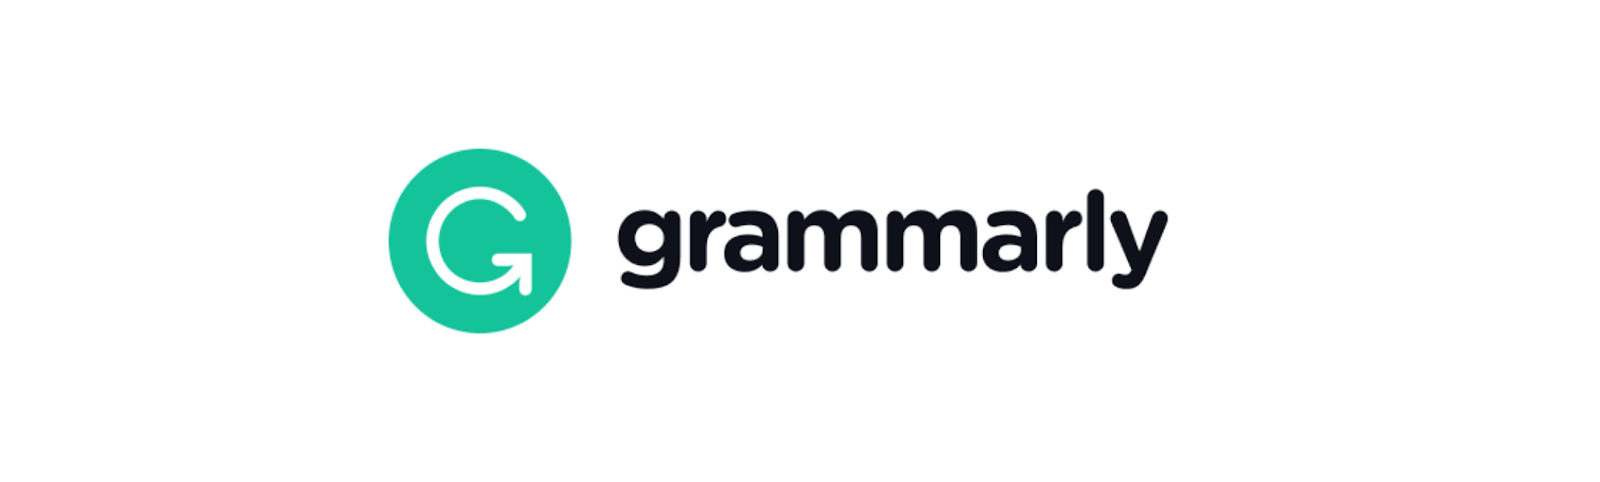 image showing Grammarly as free ai software